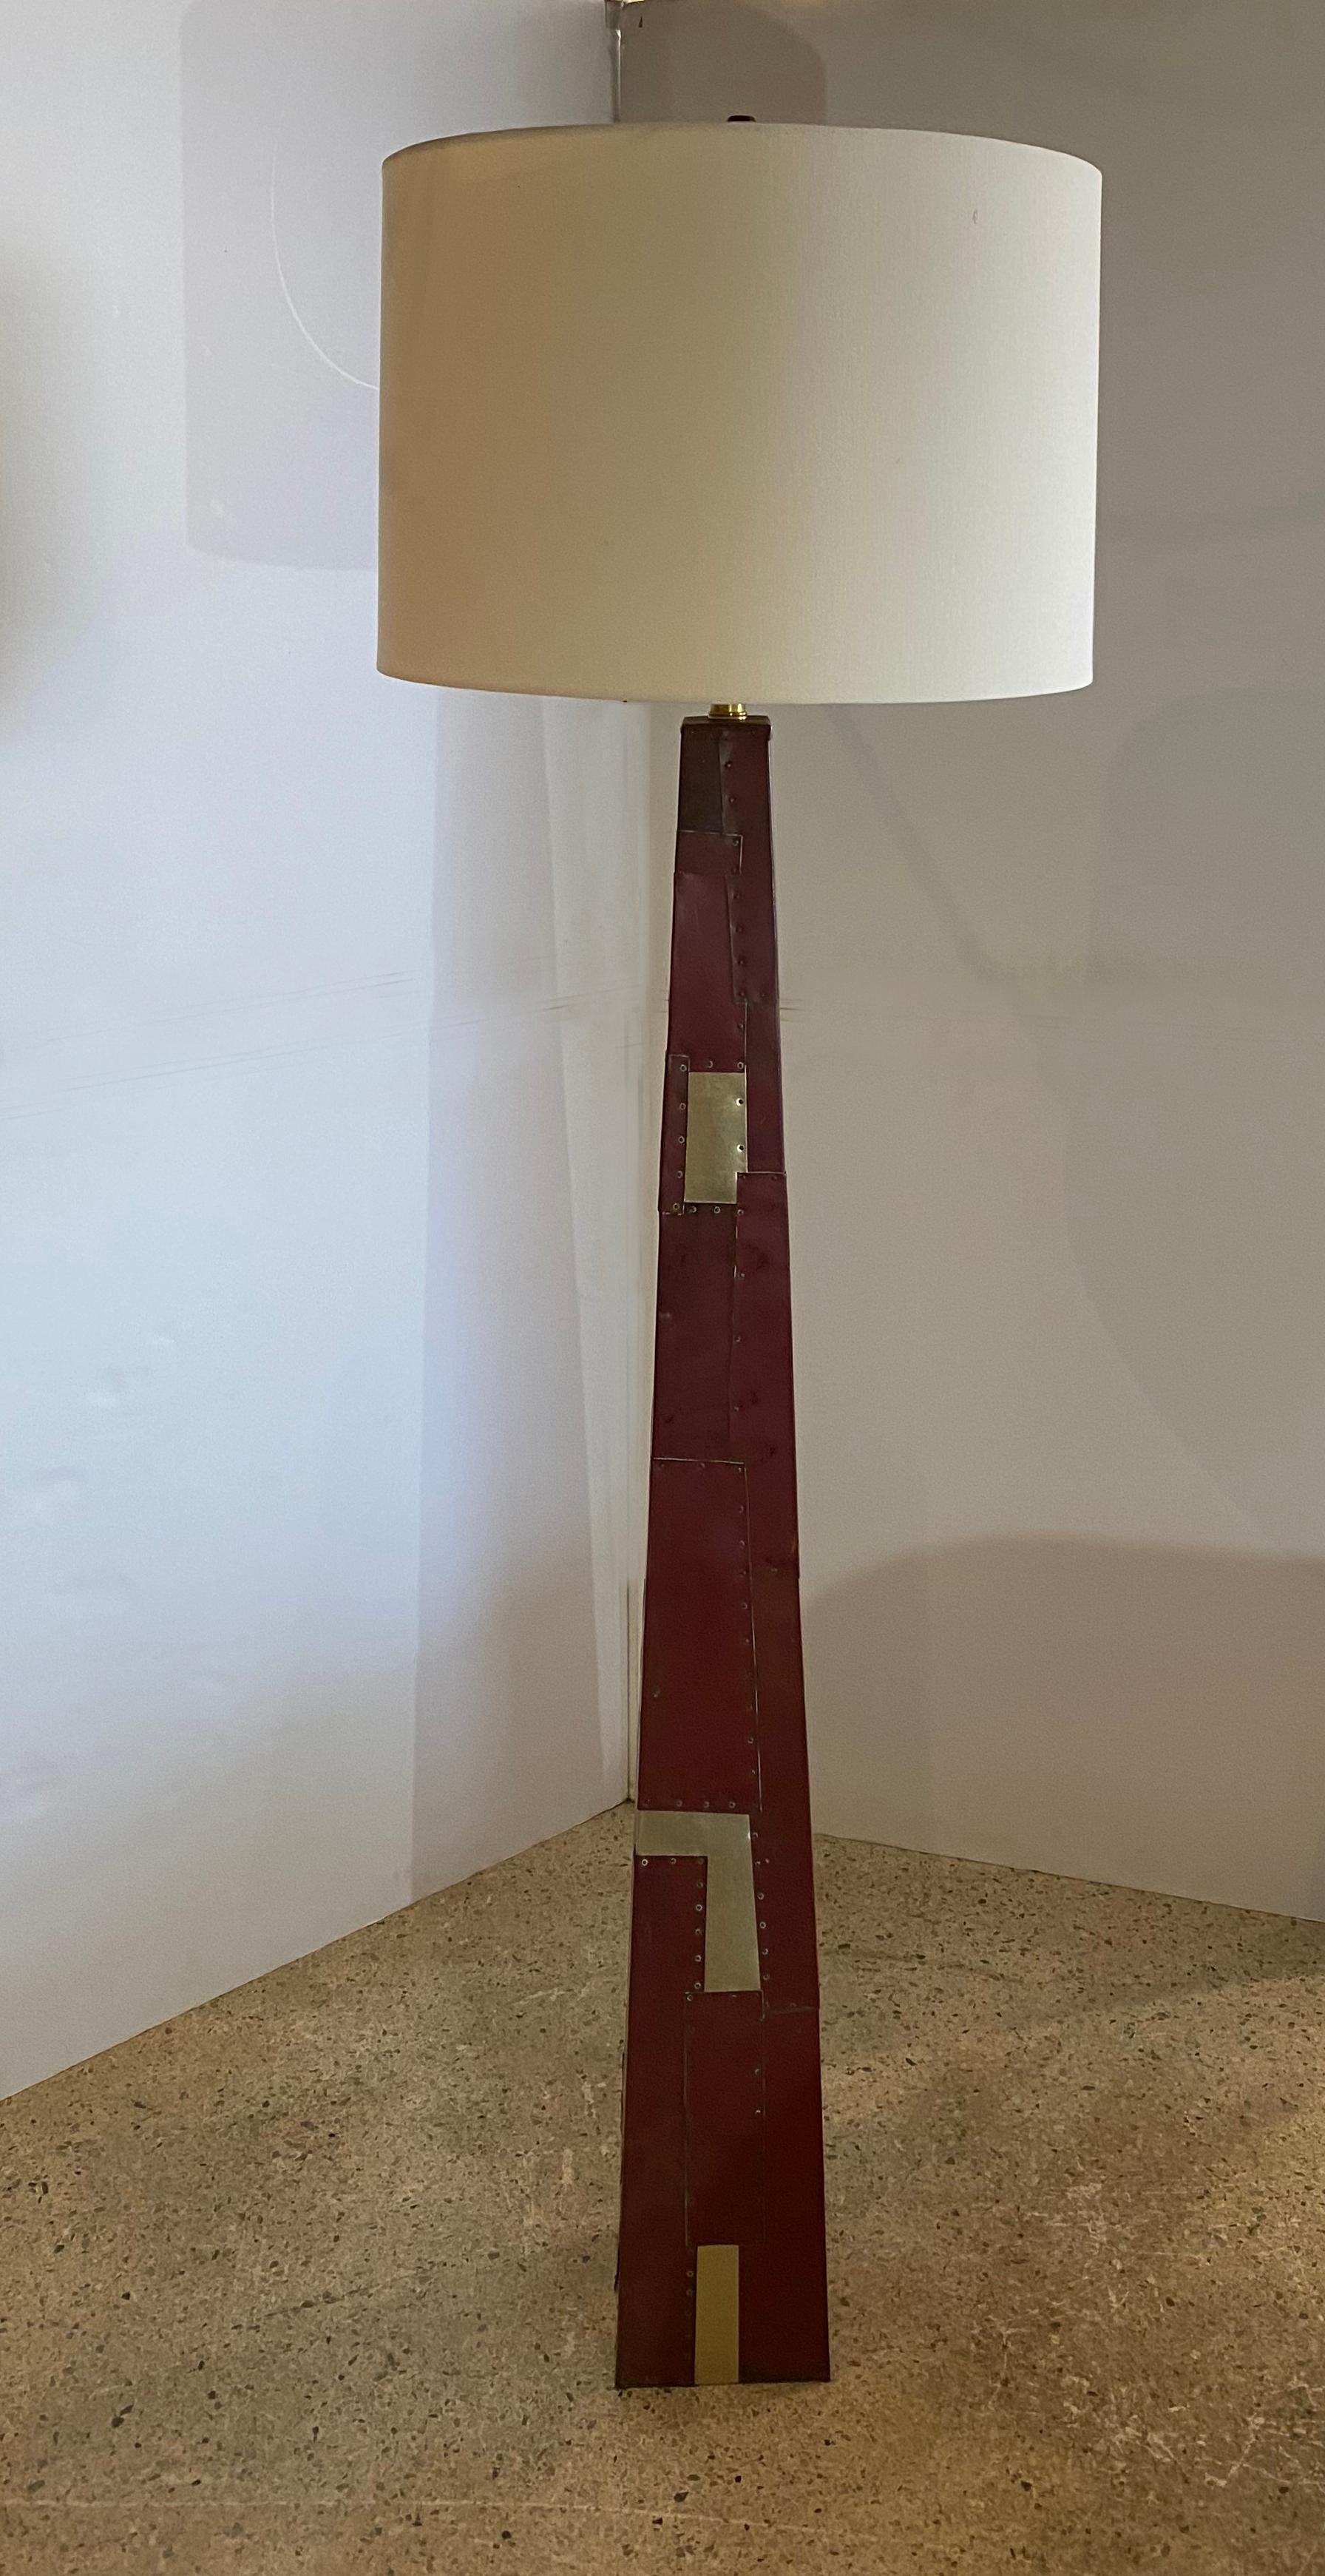 American modern floor lamp by Tony Berlant, The imposing floor lamp is made of metal sheeting, some painted 
and wrapped around the base and applied by rivets. Inserts of contrasting metal sheeting have been applied to give the base
visual